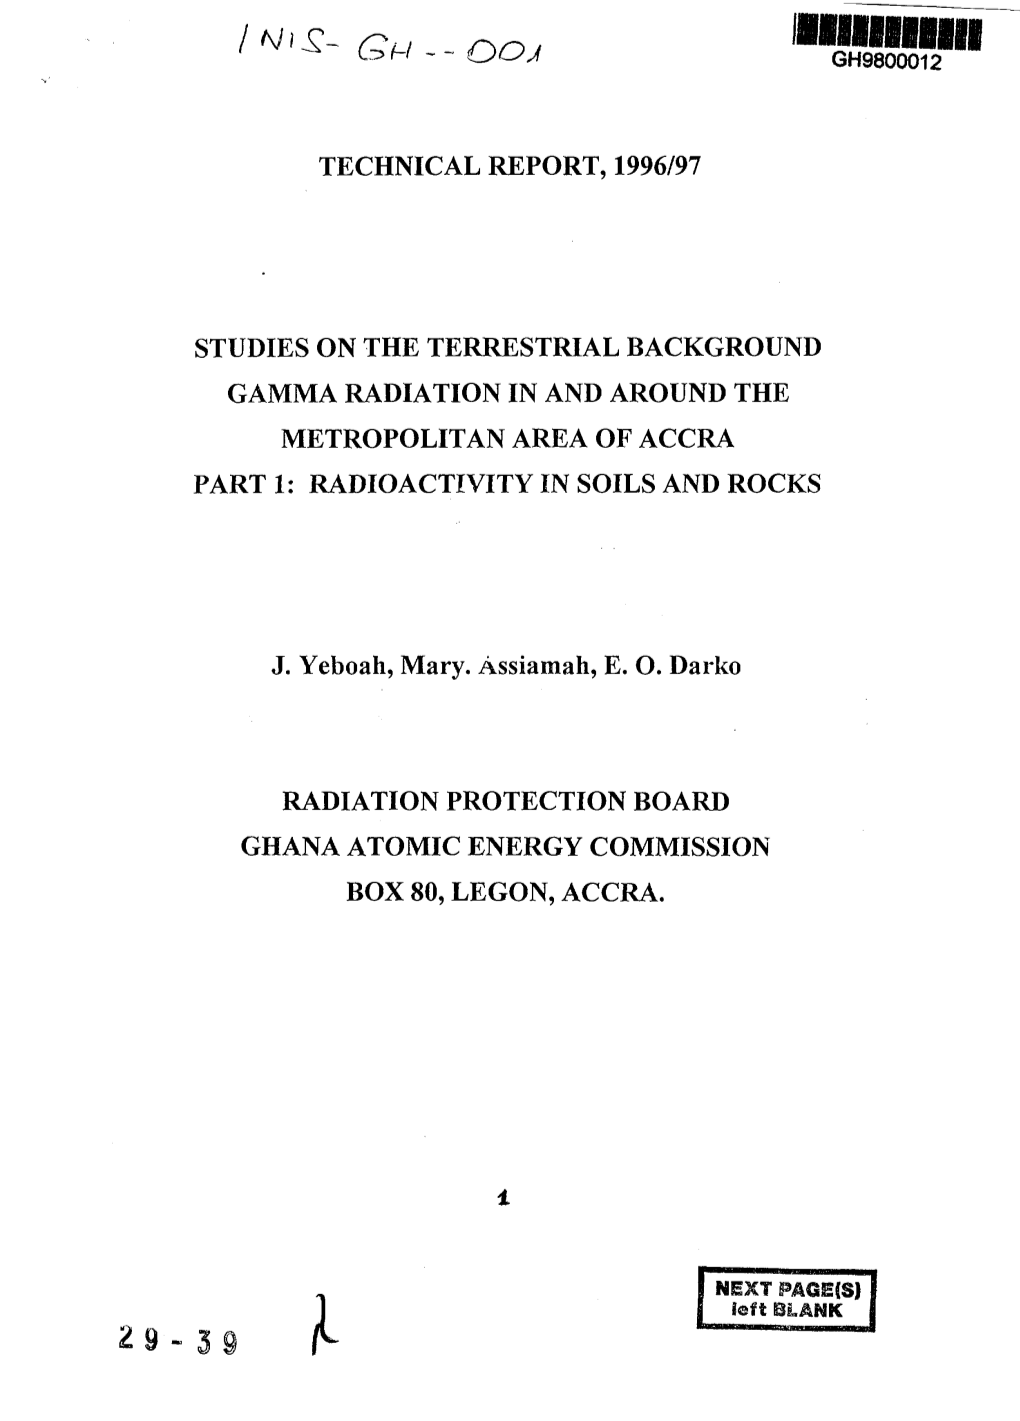 Studies on the Terrestrial Background Gamma Radiation in and Around the Metropolitan Area of Accra Part 1: Radioactivity in Soils and Rocks